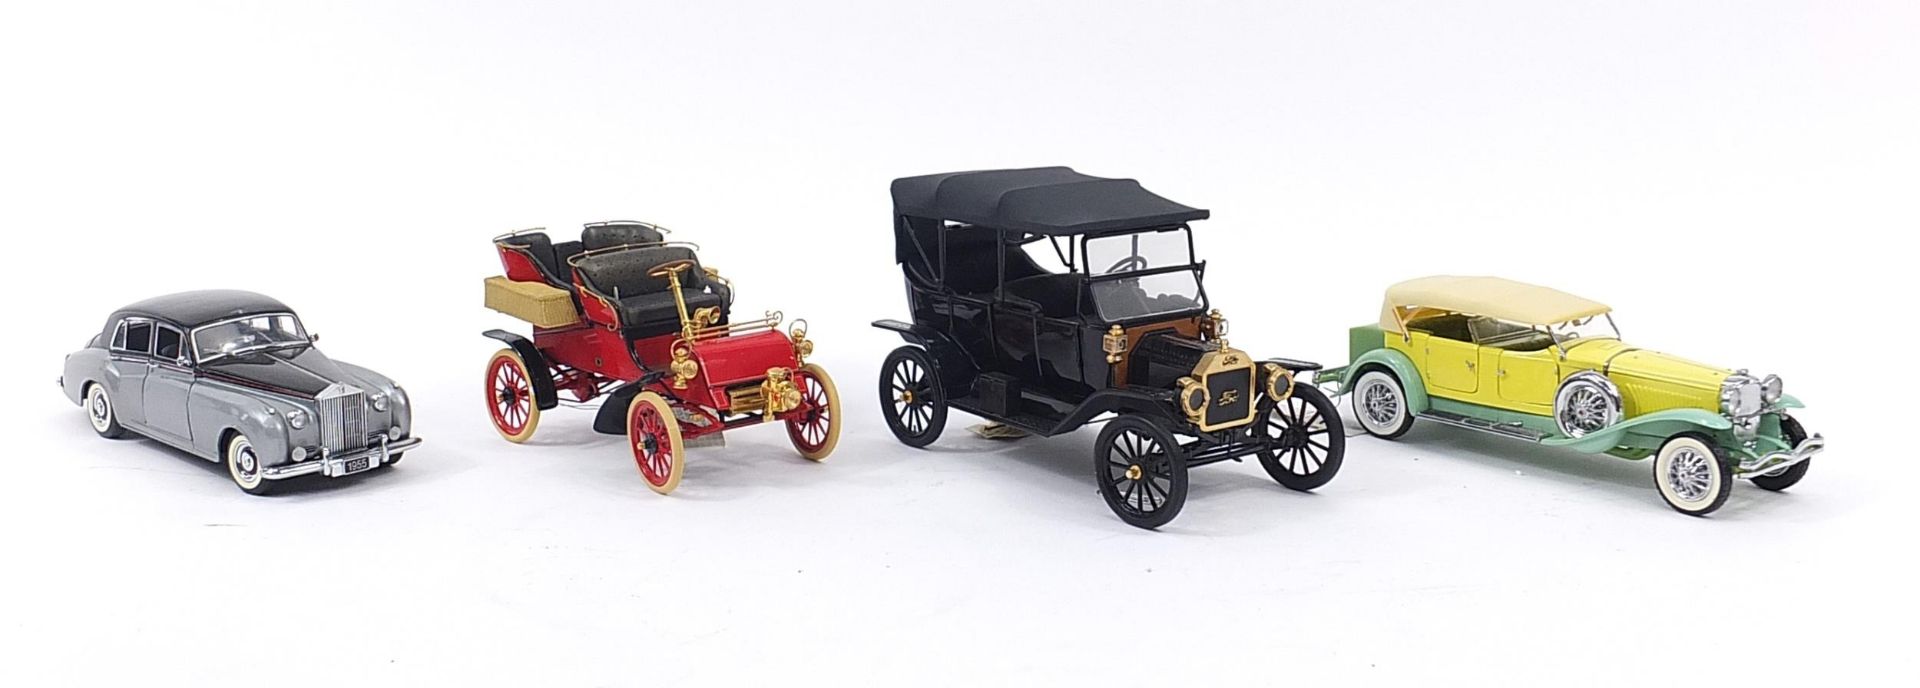 Four Franklin Mint diecast collector's vehicles including 1995 Rolls Royce Silver Cloud 1 and 1911